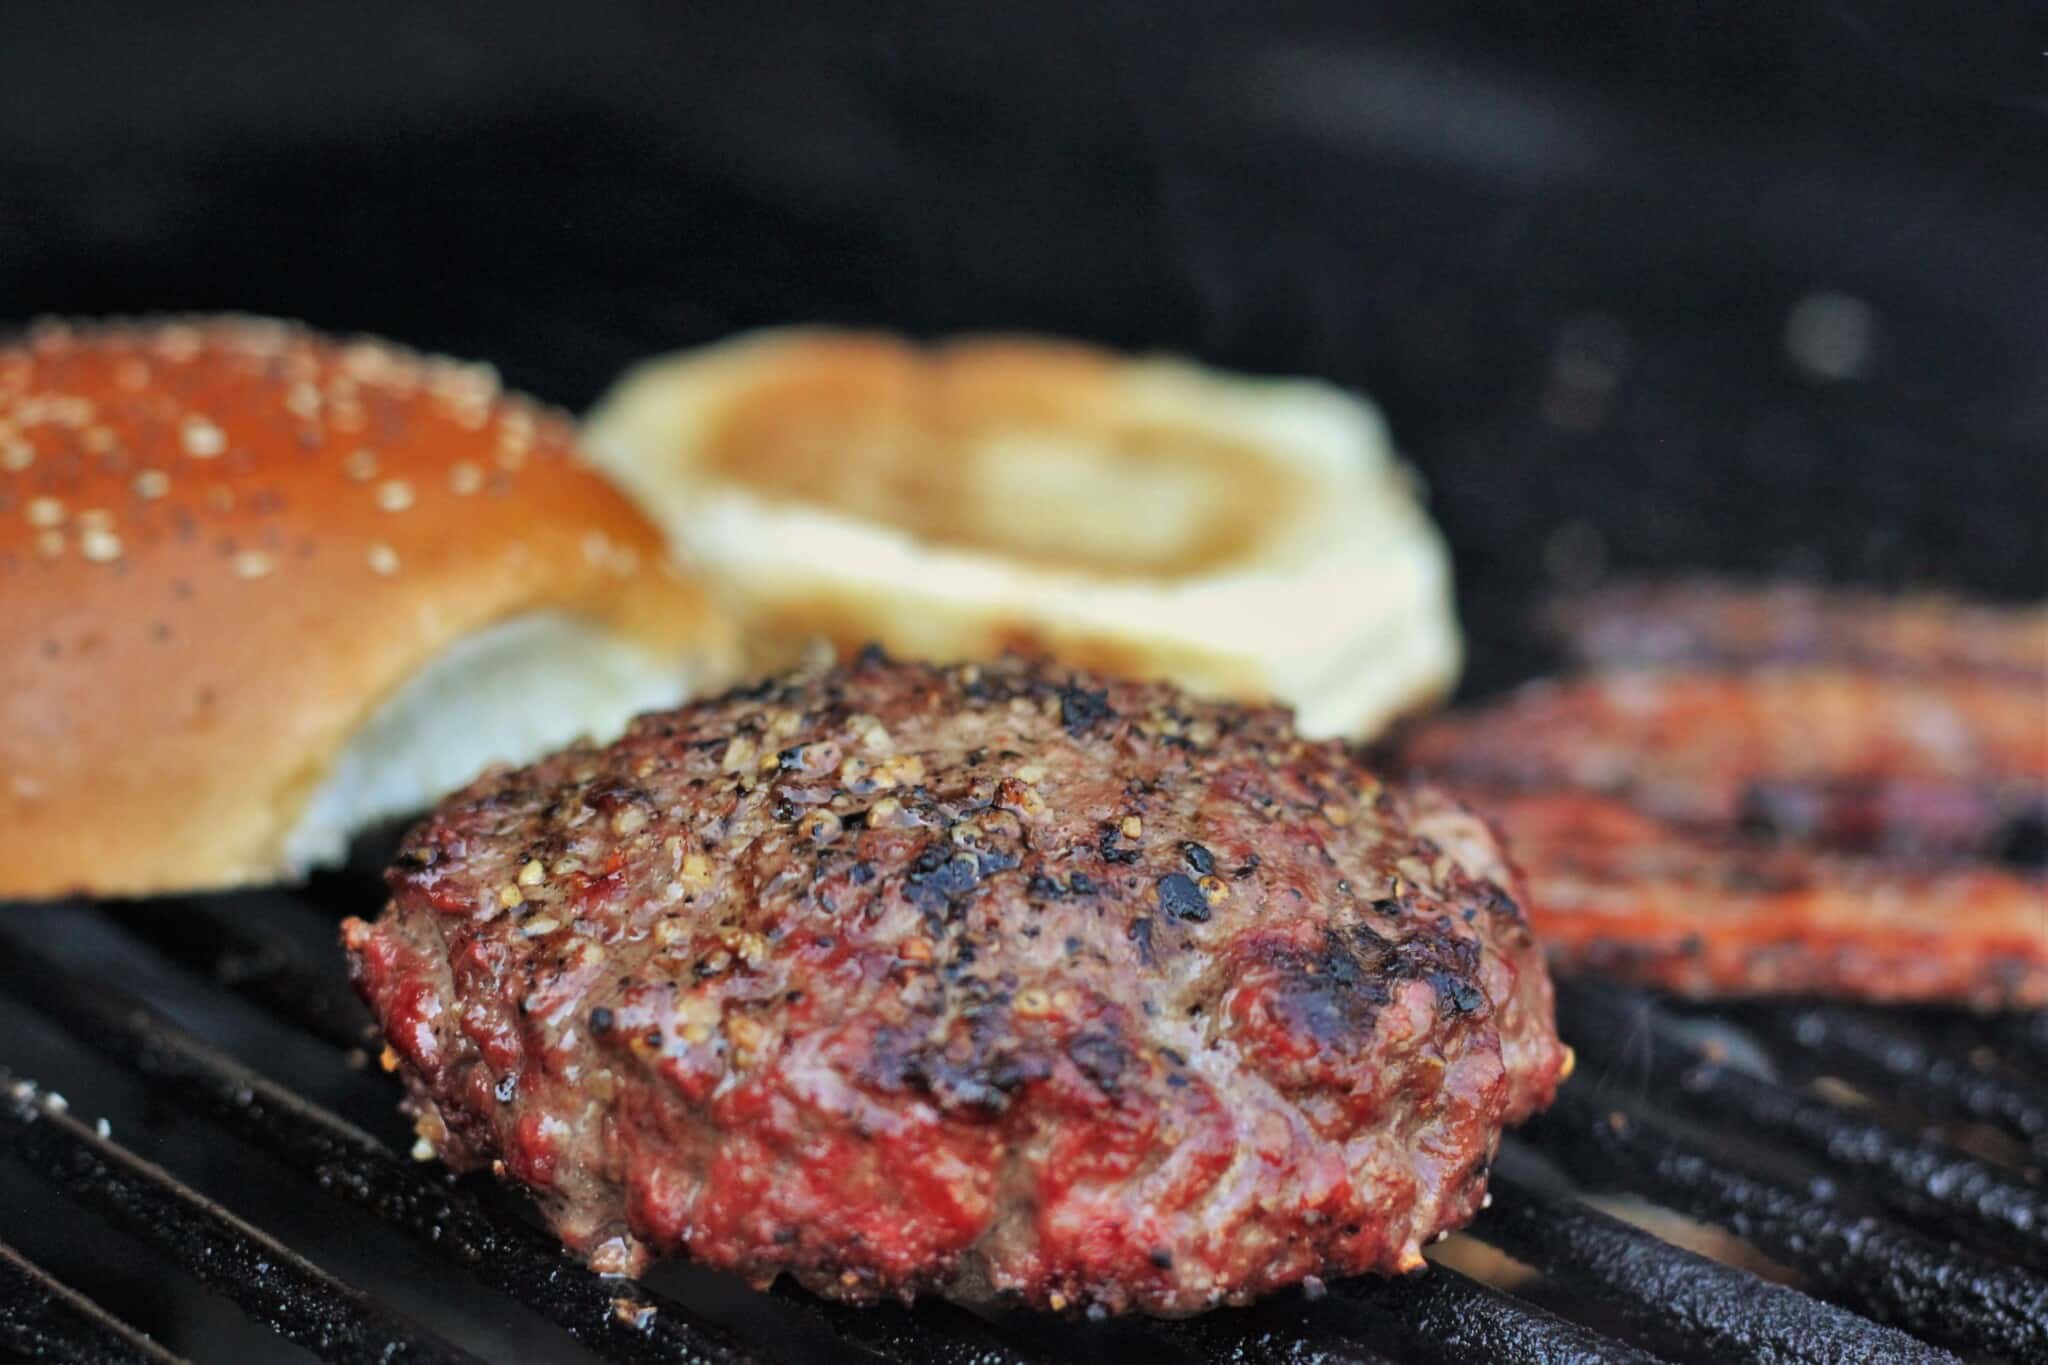 stuffed burger, buns, and bacon on the grill.